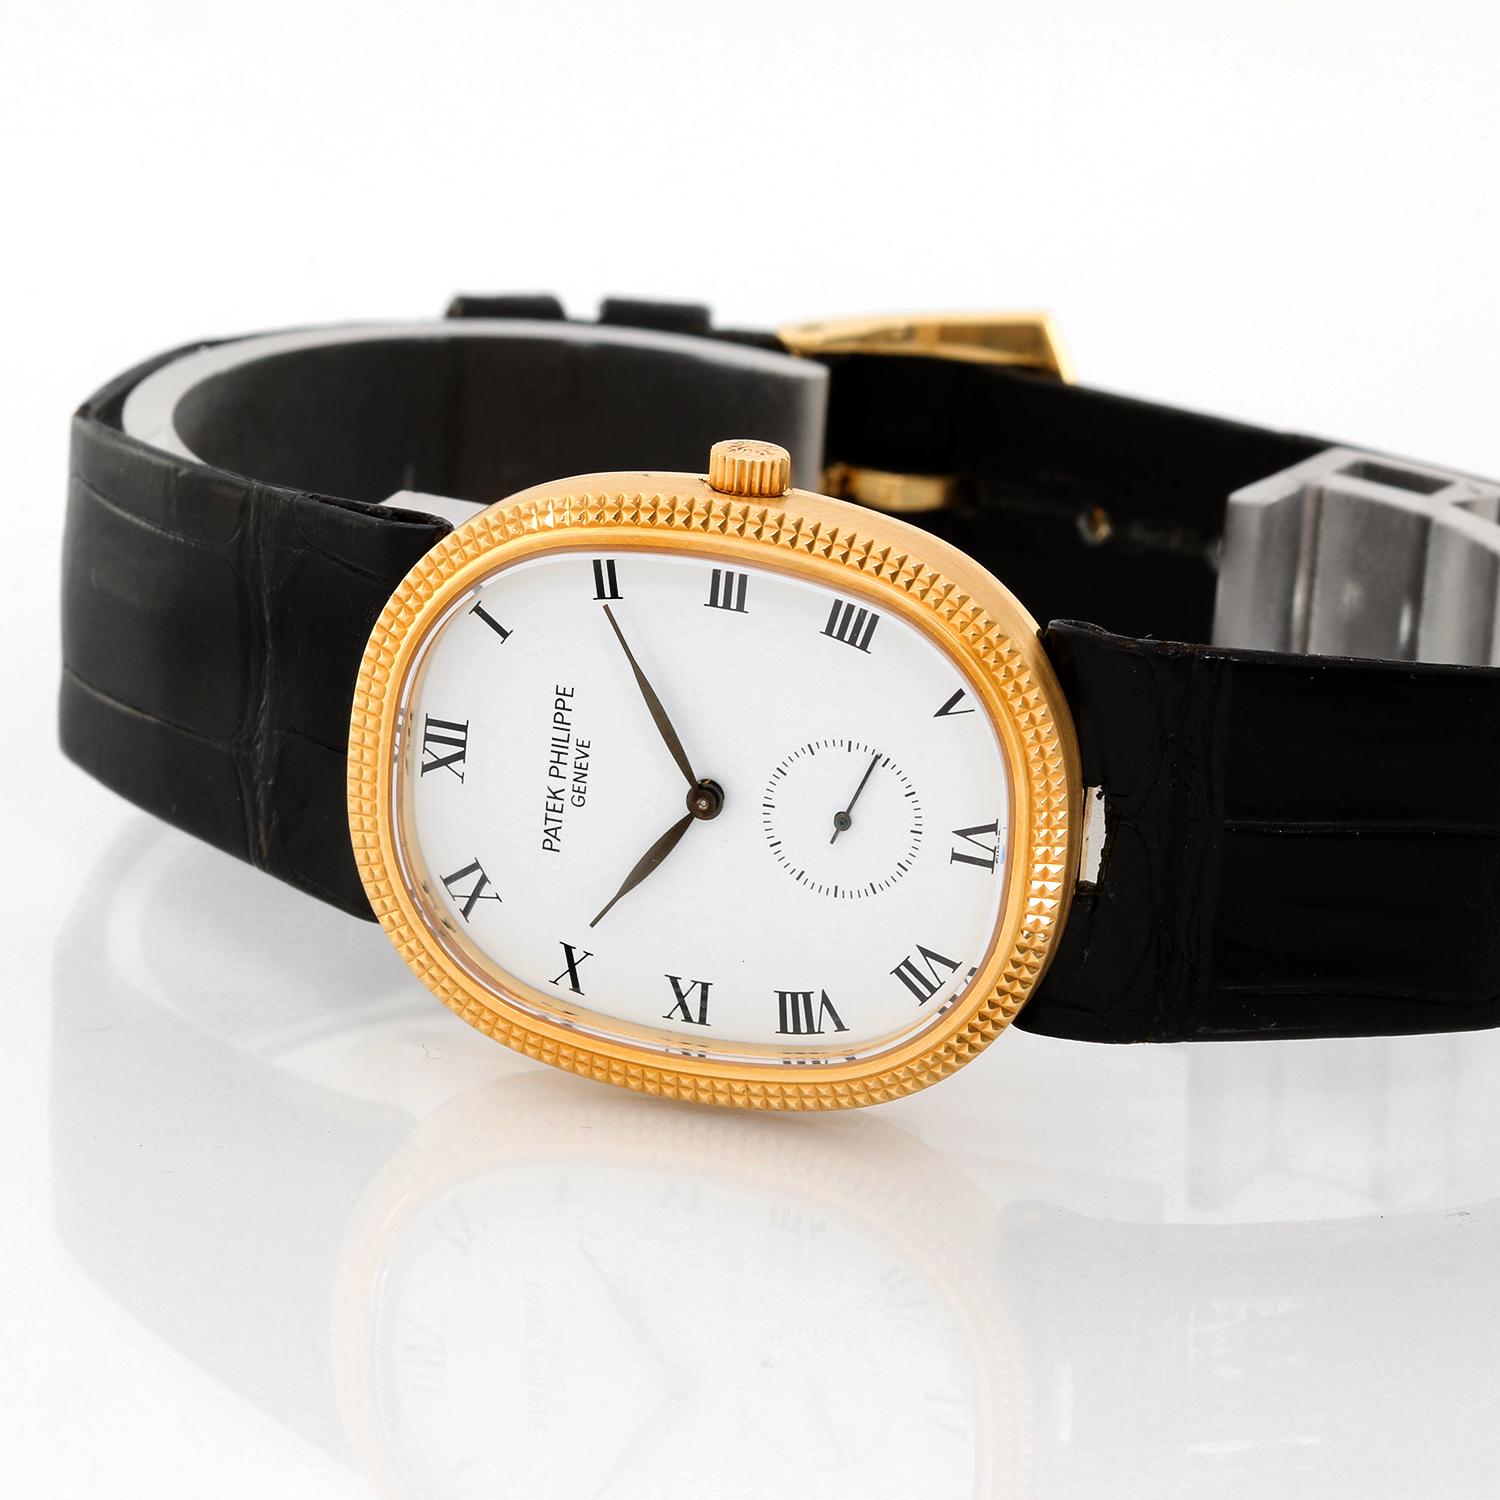 Patek Philippe 18k Yellow Gold  Ellipse Men's Watch Ref. 3978 - Manual . 18k yellow gold case (27mm x 32mm). White dial with black Roman numerals; seconds subdial. Patek Philippe & Co. leather band with 18k yellow gold Patek Philippe buckle.